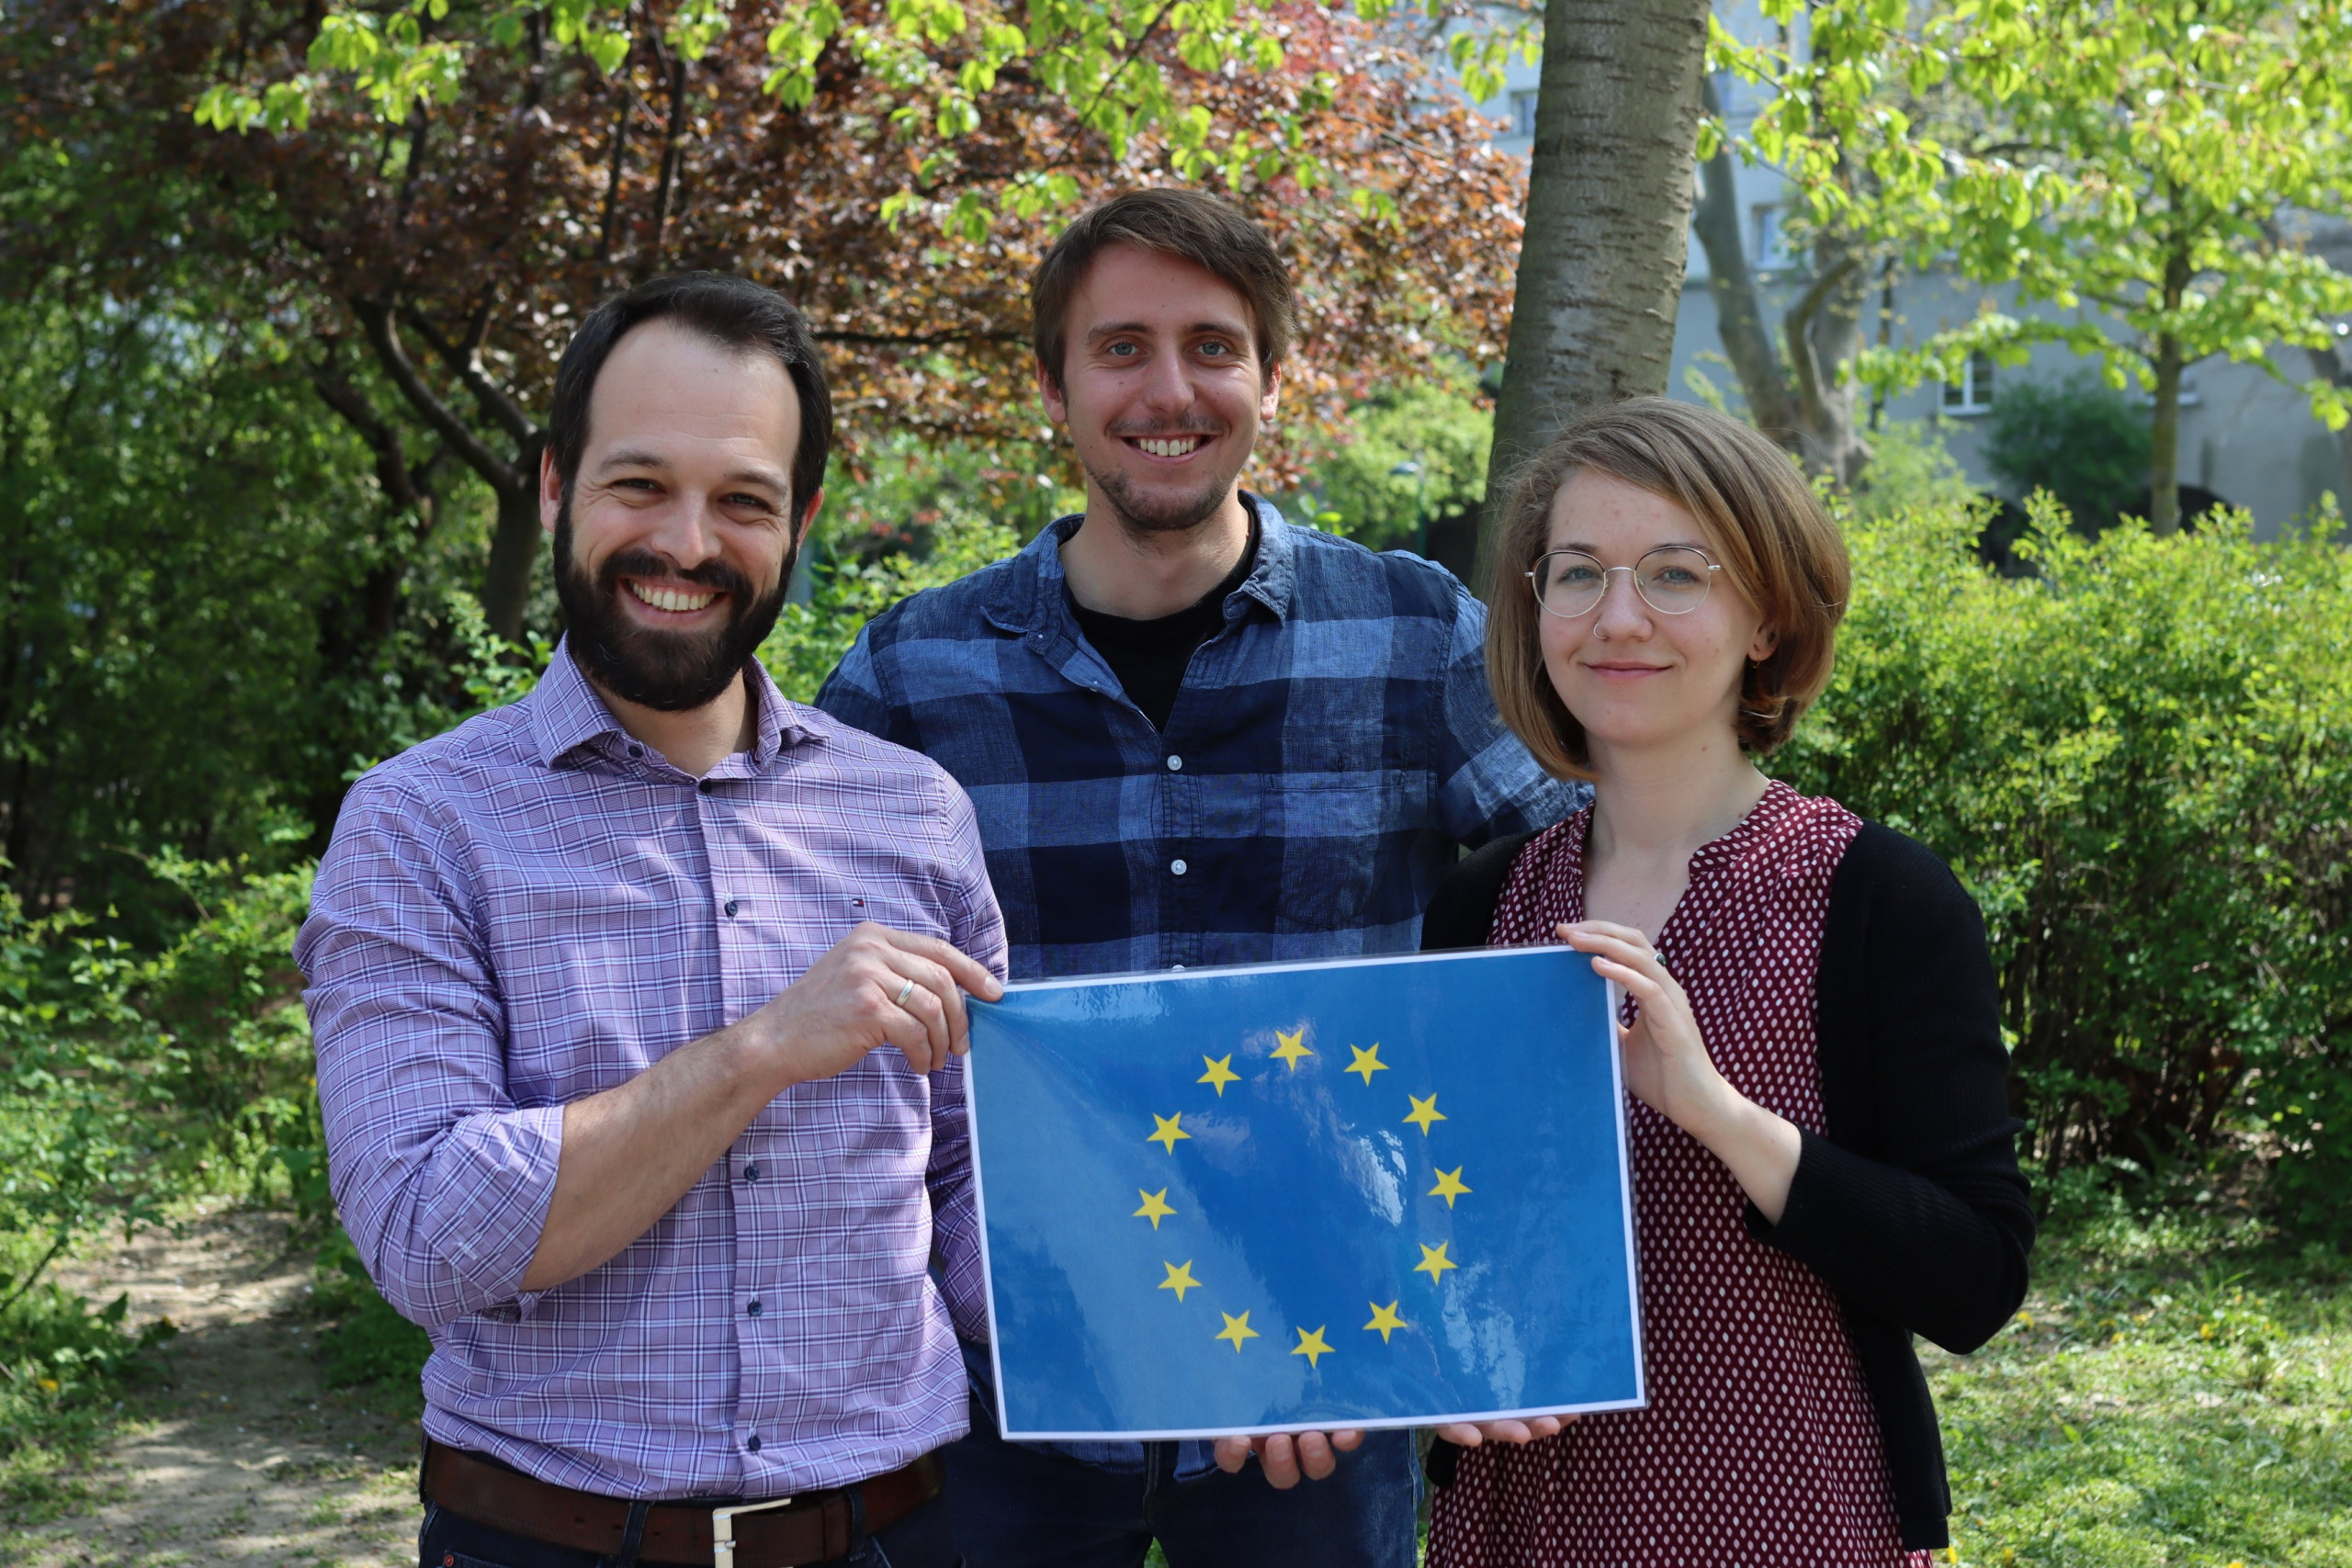 Sebastian Frank, MSc (project manager, national projects and European cooperation), Oliver Böck, MA (project management team, national projects and European cooperation) and Julia Probst, BA (project management team, European cooperation). (from left to right)